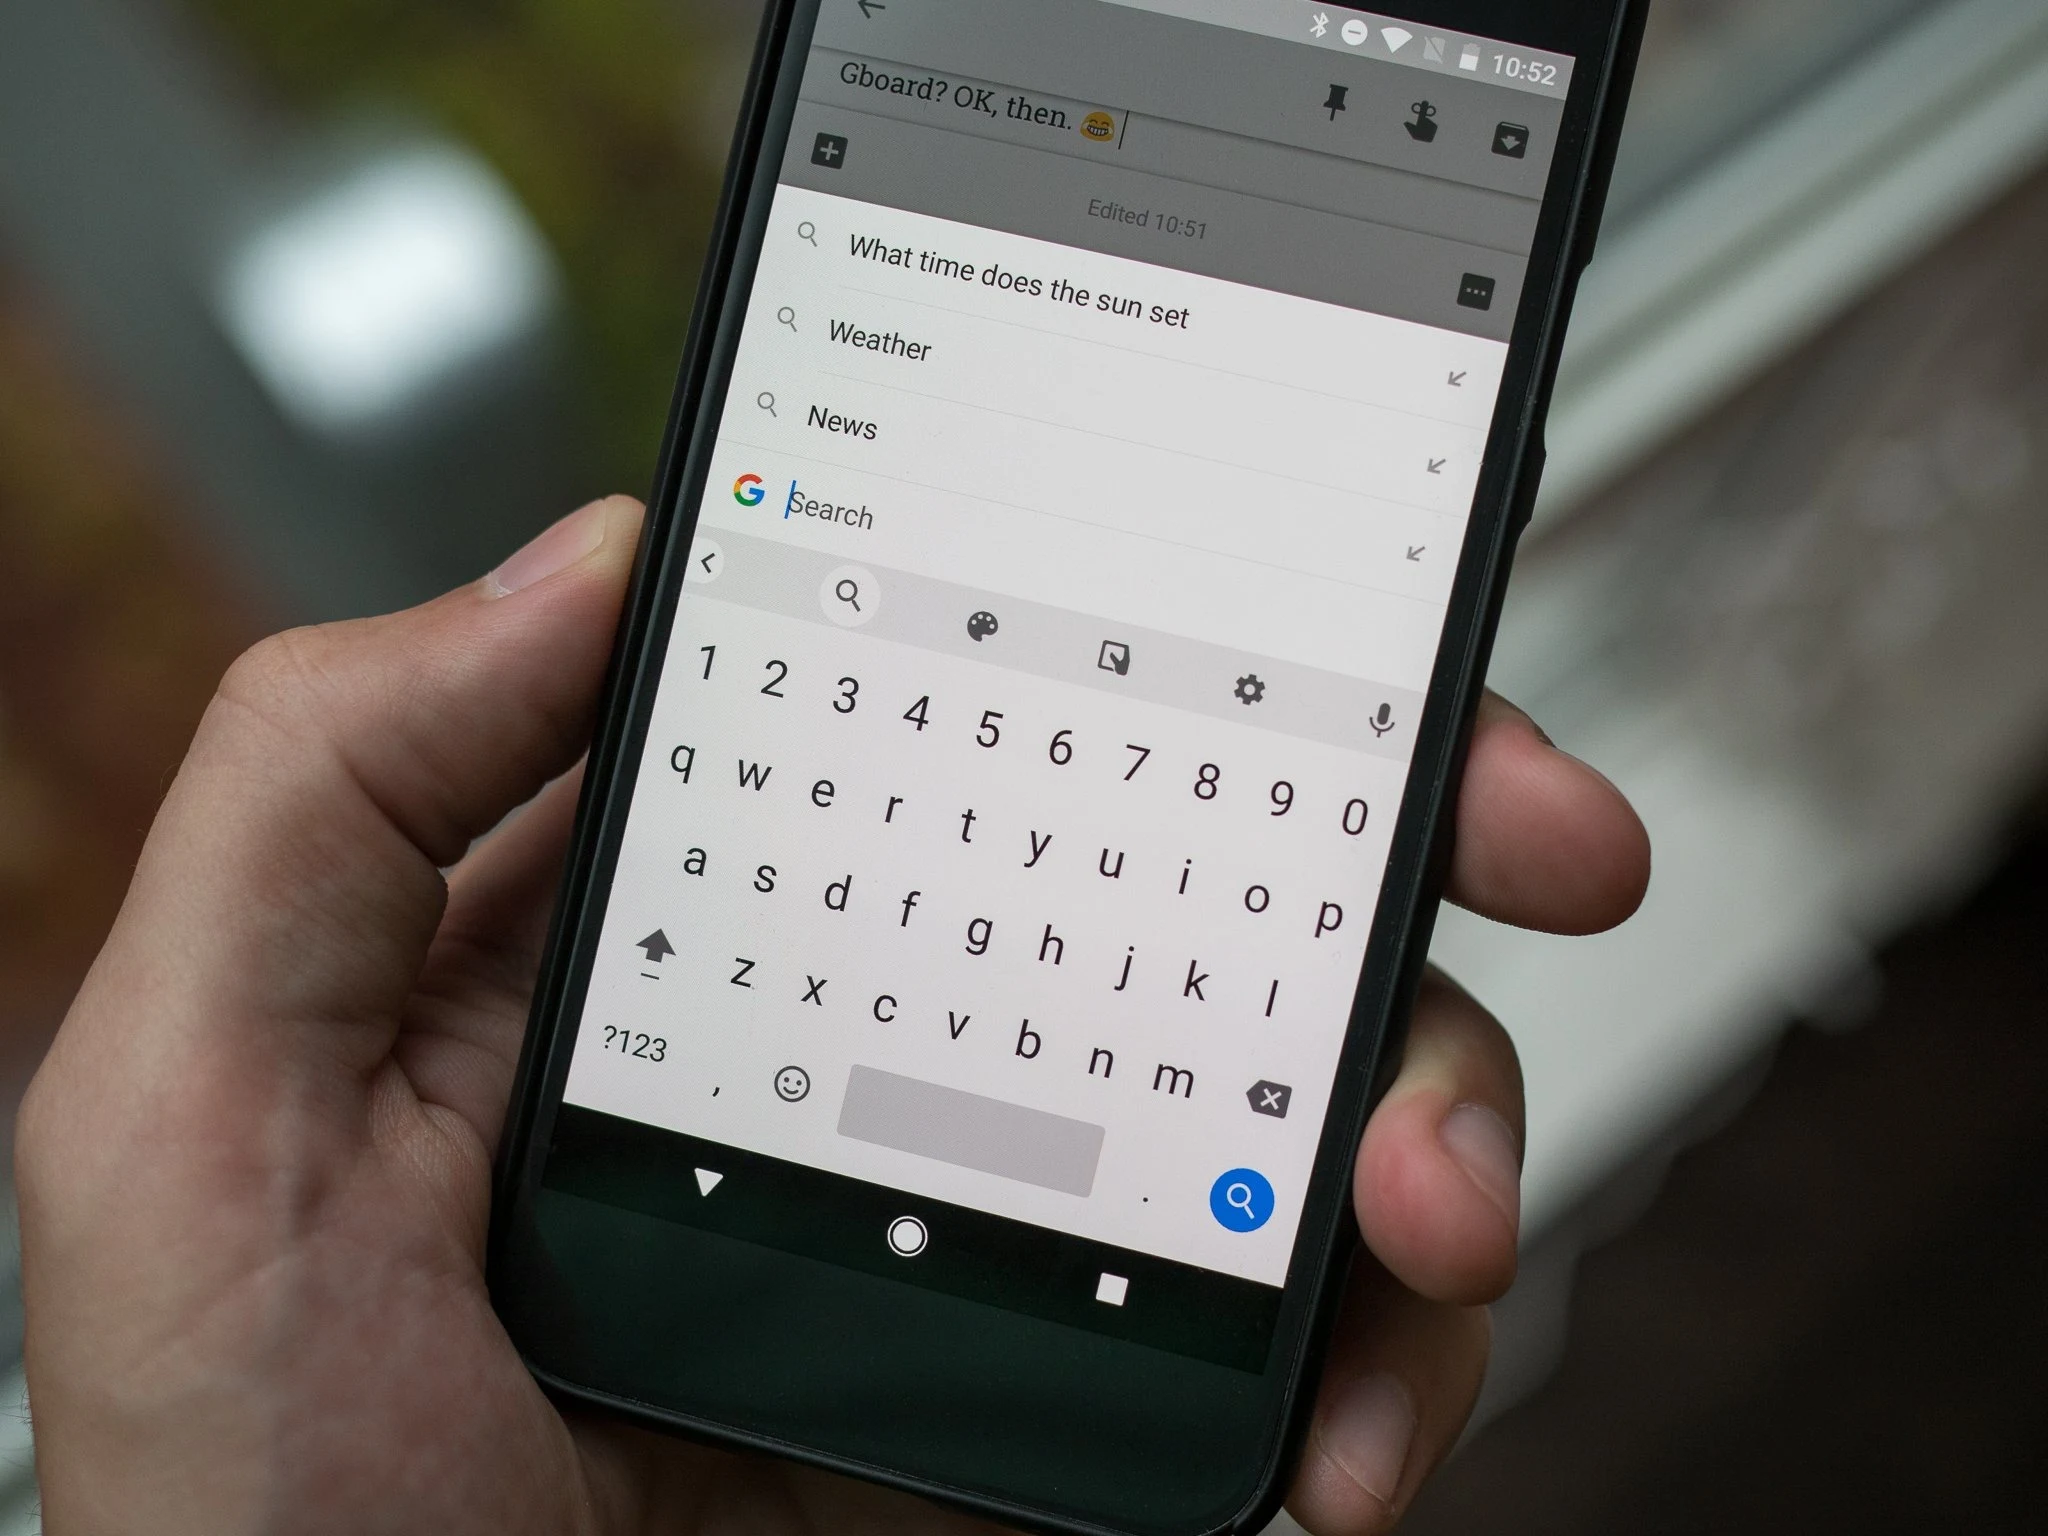 Google Gboard's Latest Beta Introduces "Seamless Voice Typing" for Effortless Texting